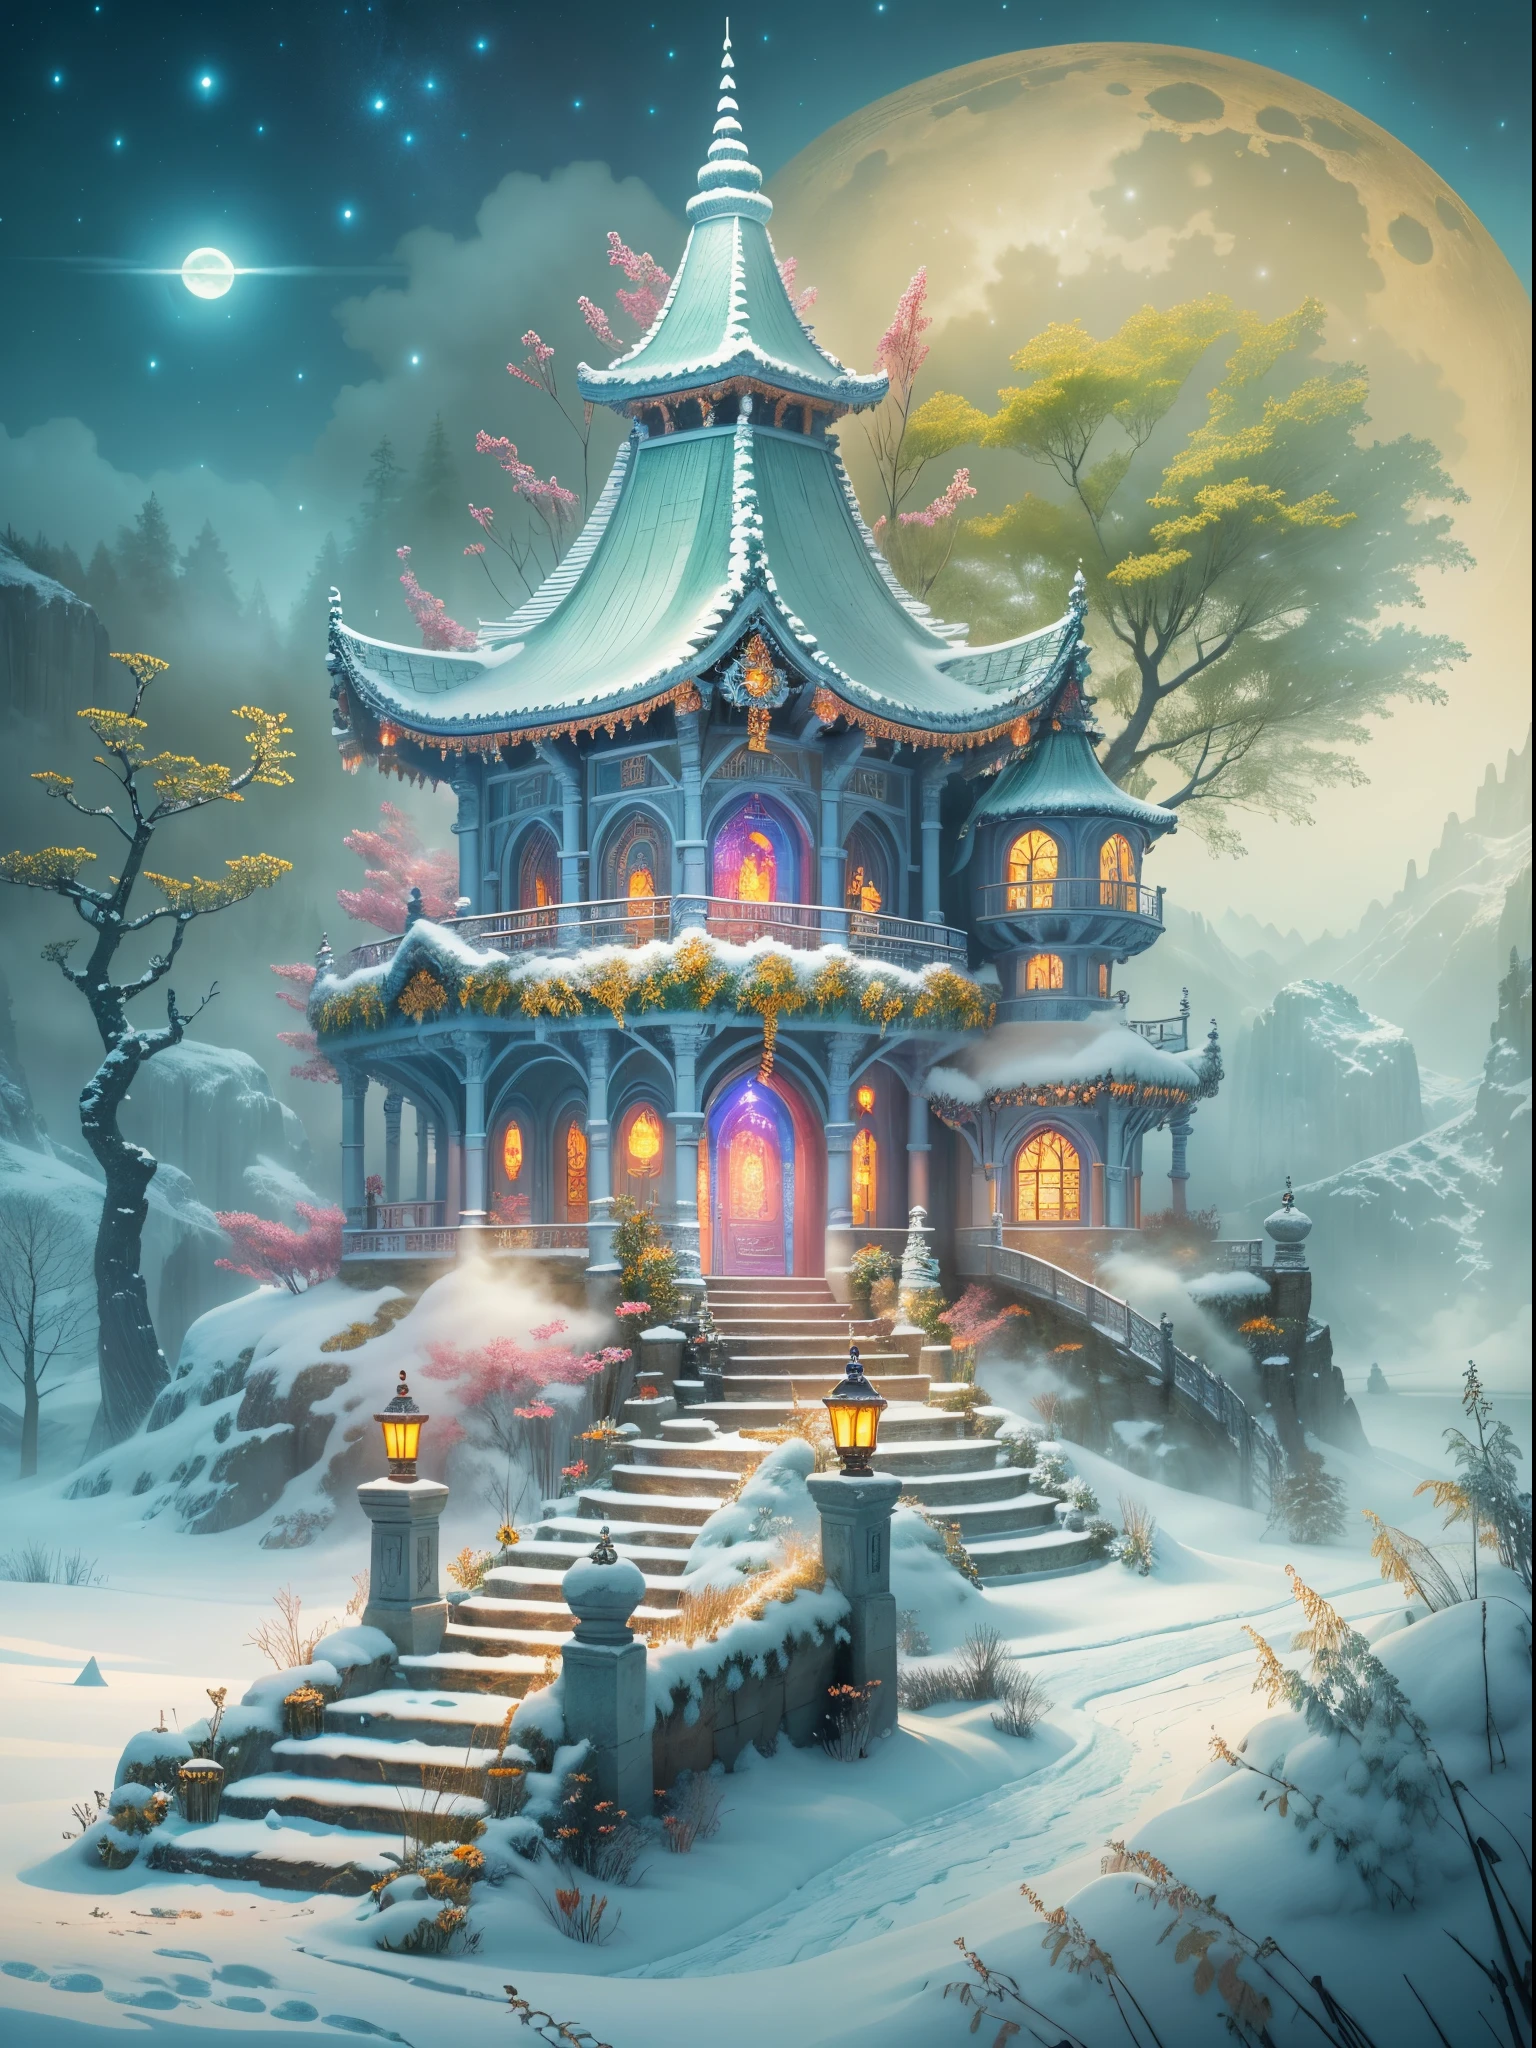 (tmasterpiece),（ultra - detailed：1.3），Best quality，(Sparkling: 1.2), (Winter wonderland in fantasy mythology: 1.4), ((Fresh, chill, mountains, white mist, , vastness, bamboo forest, frost flowers, diamonds, breeze, bamboo leaves, sounds of nature, lake, Ancient, pavilion, sacred, tranquil, peaceful, otherworldly, beautiful, tranquil, secluded, treasure, nature, magic, creativity)), illustration style, and decoration, dreamy winter wonderland, lovely design style, Evening, snowy field, full moon, bright colors, ((whimsical and charming fantasy)), surreal portrait, (fantasy-themed winter day), (whimsical wonderland), (colorful, mist-filled landscape), (enchanting , magical creatures), (a vibrant, mist-shrouded palace), (white cloud road), (rich, dreamlike colors), (twinking stars) elevated, (fourth-dimensional dreamland), (enchanting and enchanting atmosphere), (playful composition), (vivid lighting effects), 1.4x realism, ultra-high definition, displayed in this beautiful scene, （Very meticulous，Reasonable design，Clear lines，High- sharpness，tmasterpiece，offcial art，movie light effect，8K)